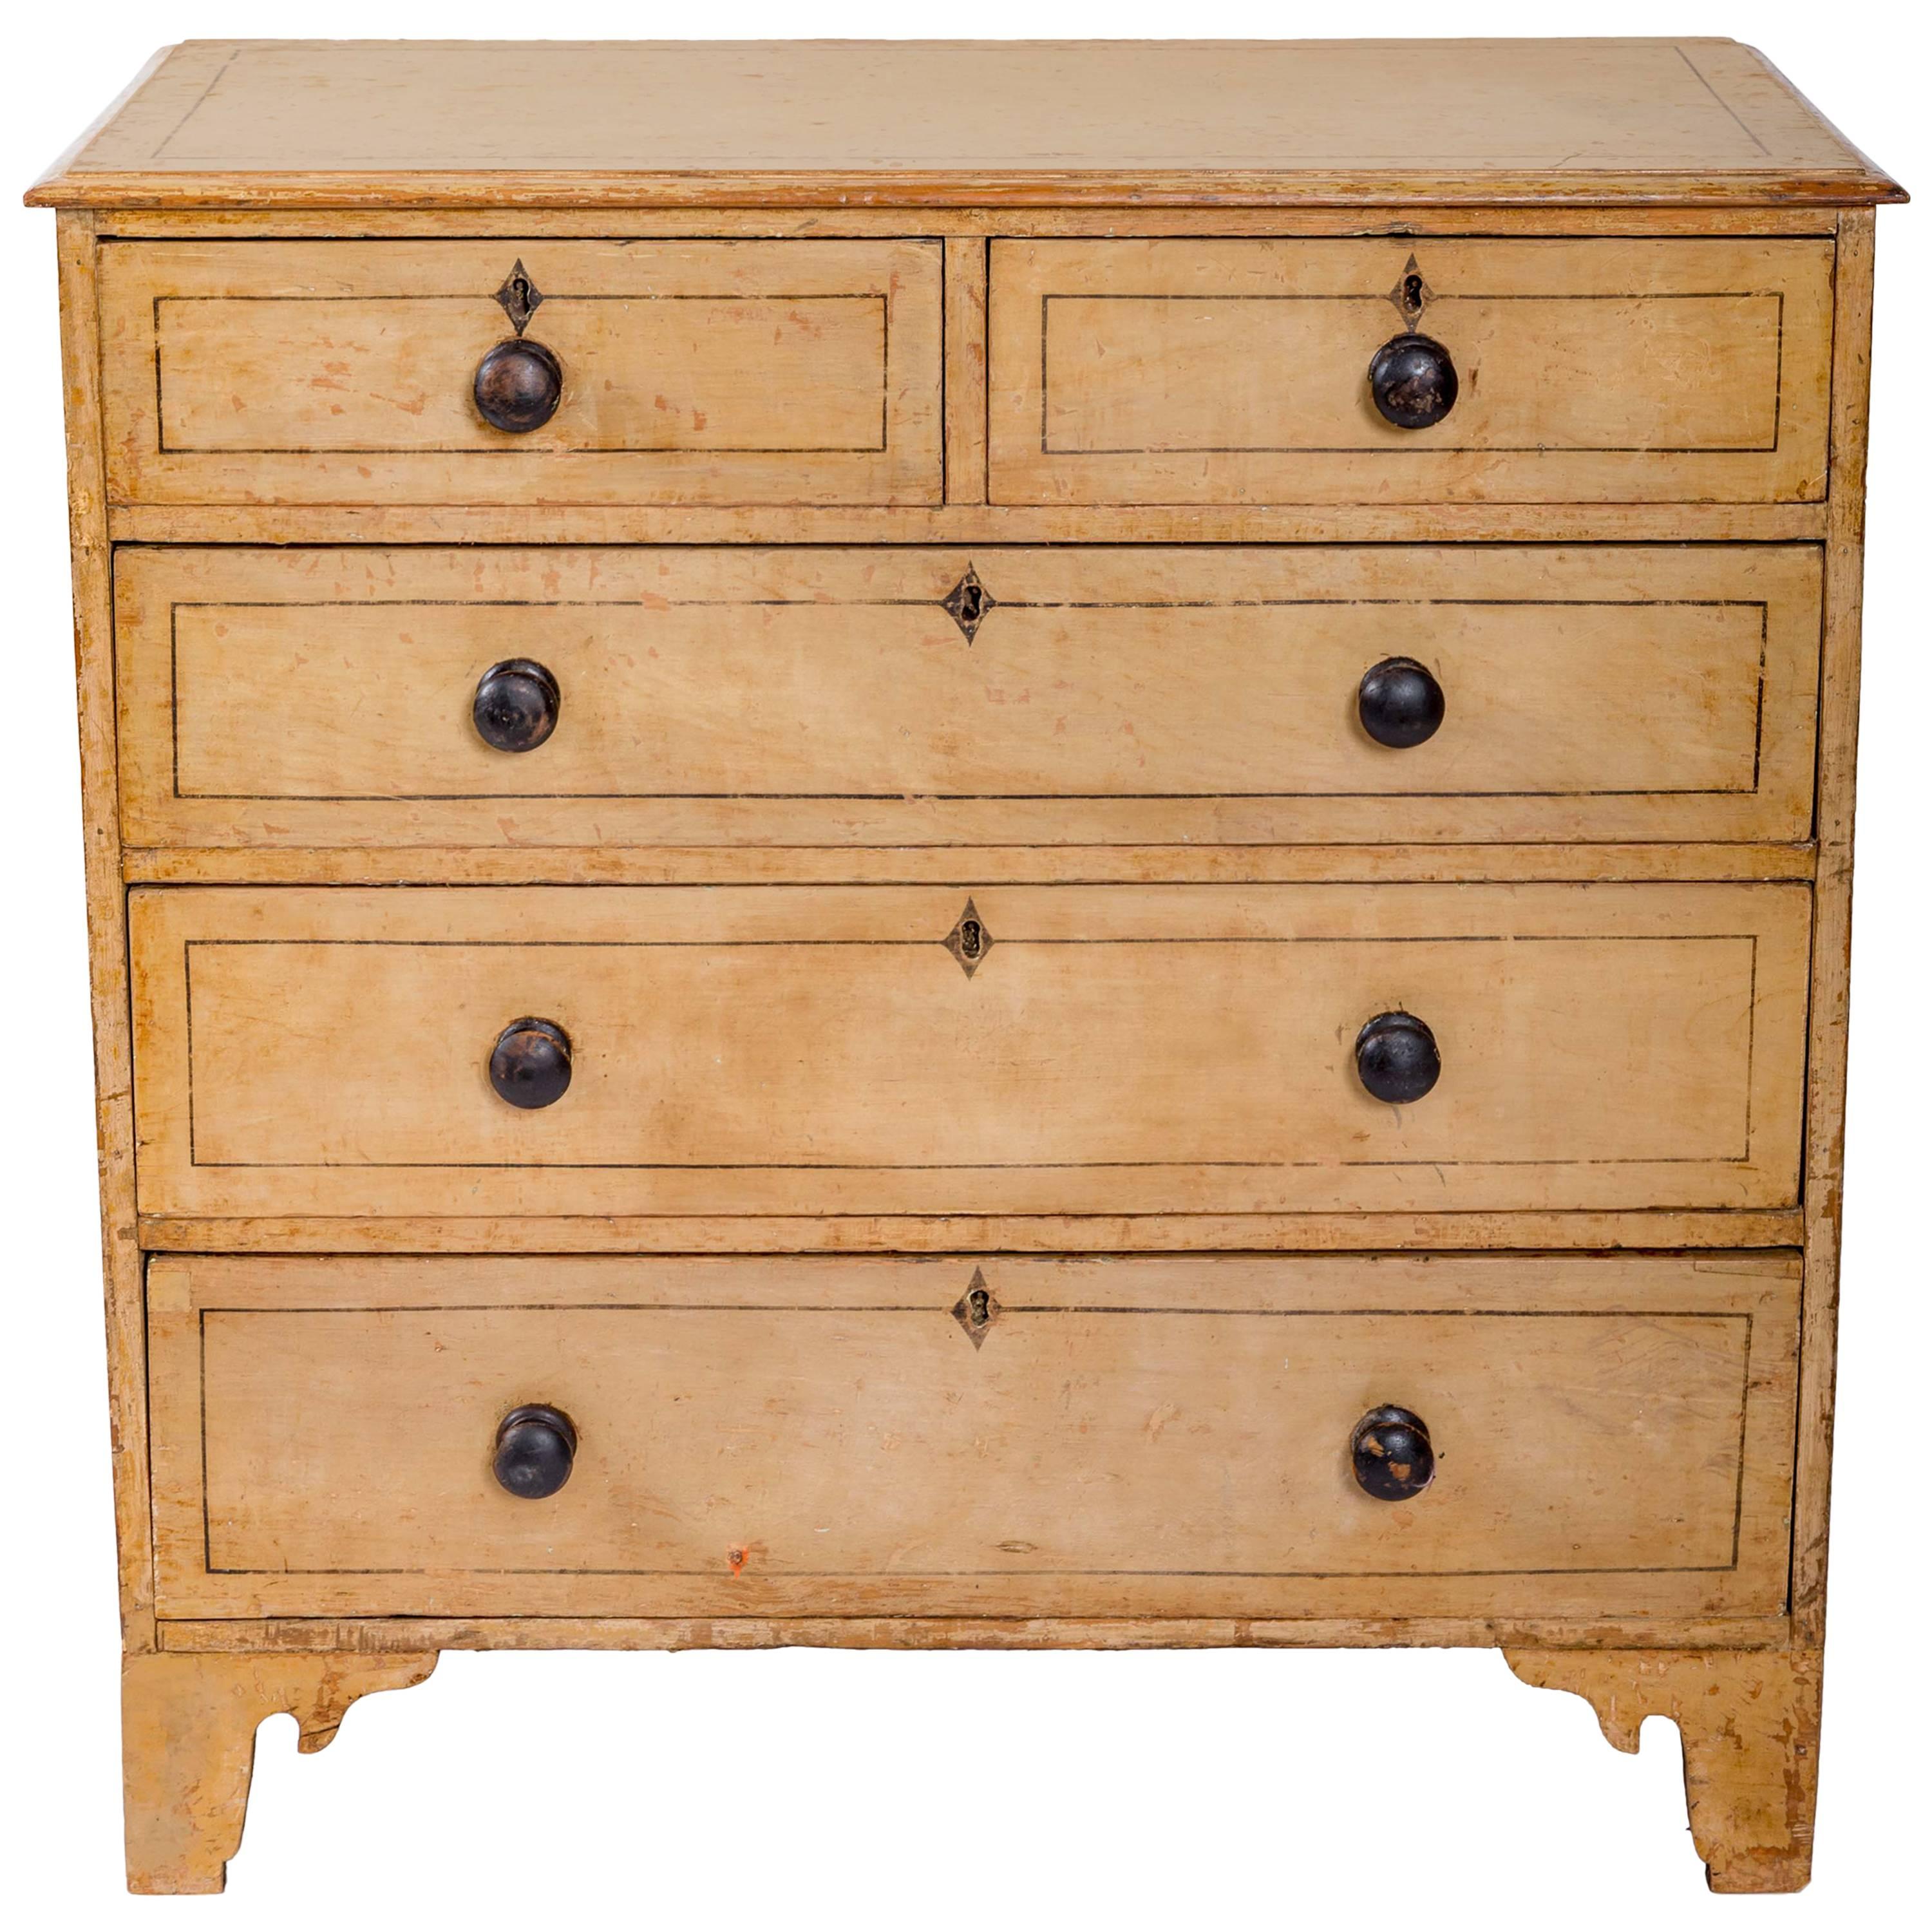 Early 19th Century Painted Chest of Drawers, England, circa 1840